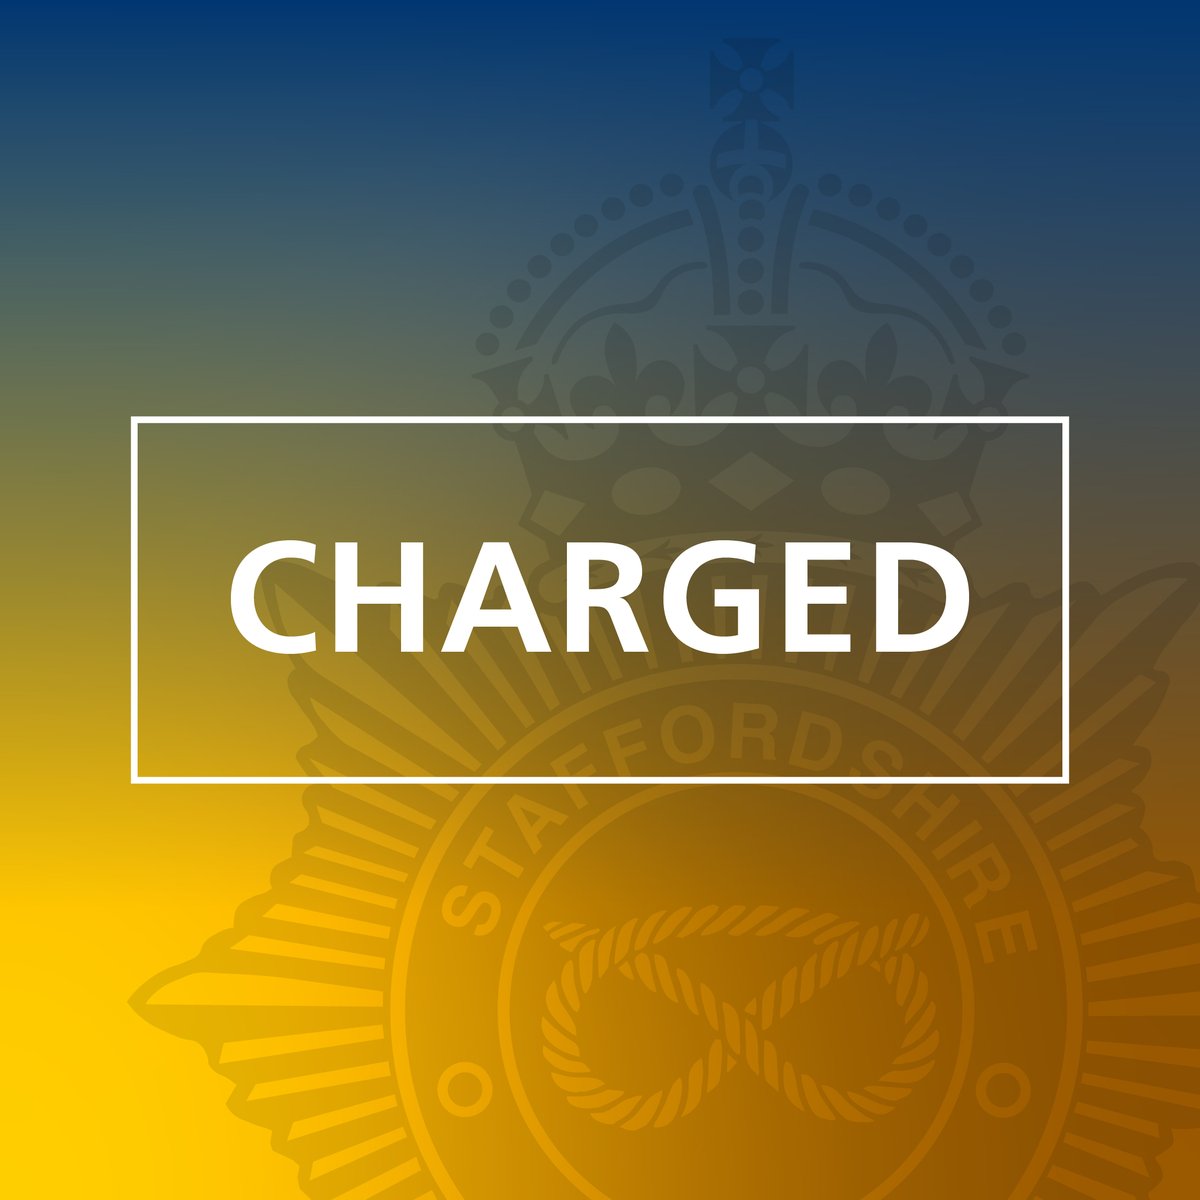 A man has been charged with weapon offences following a disturbance in Tamworth. Read more: orlo.uk/H4v65